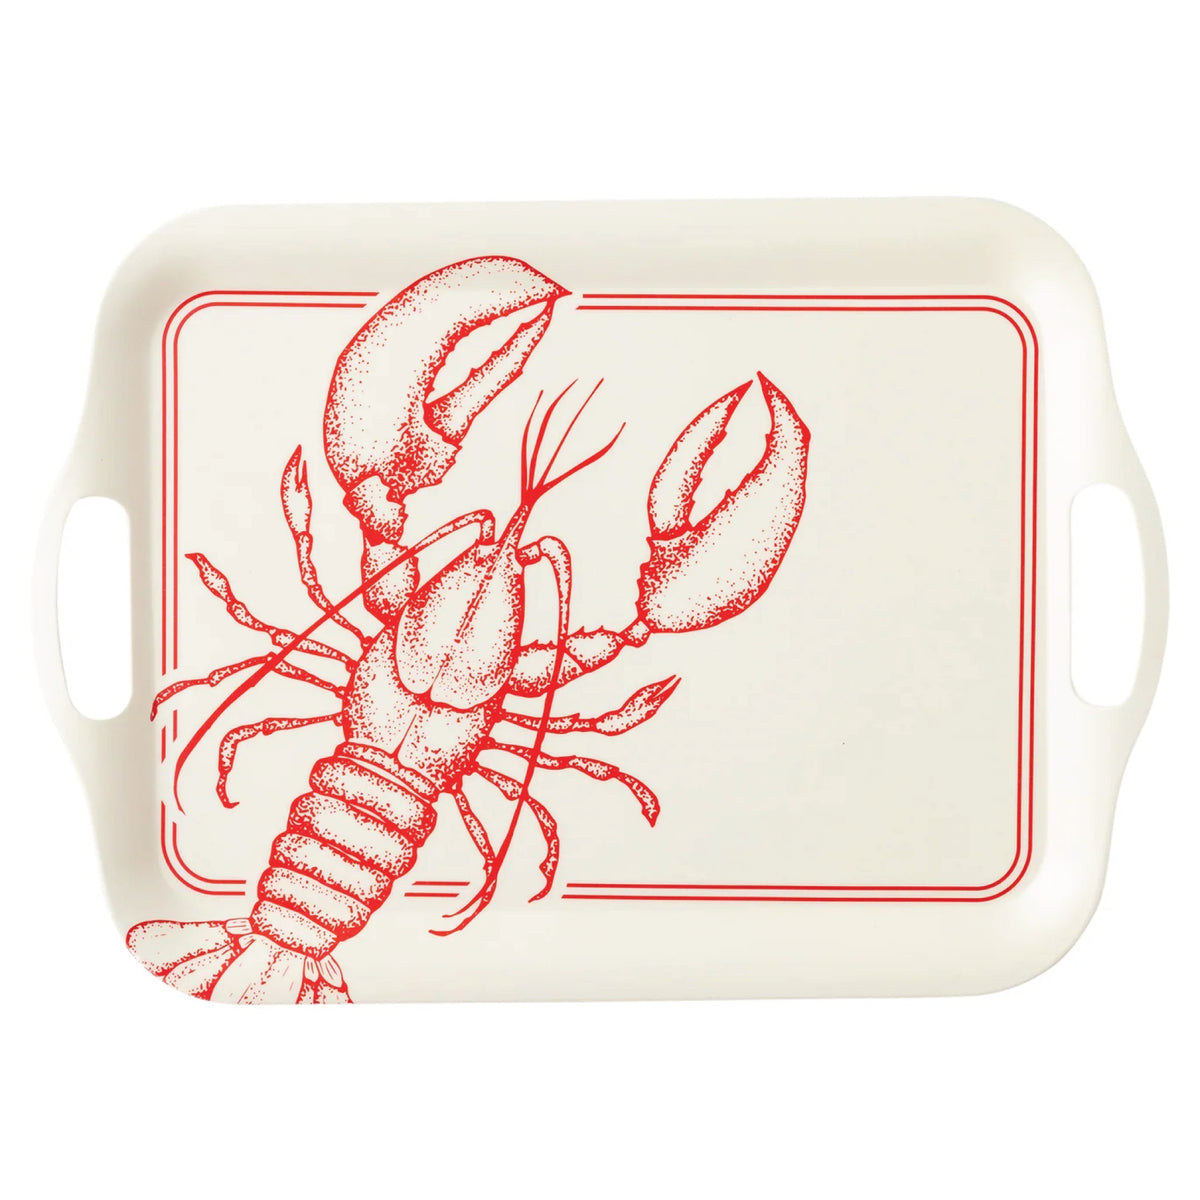 Custom Printed Funny Seafood Boil Party Supplies Crab Oilproof